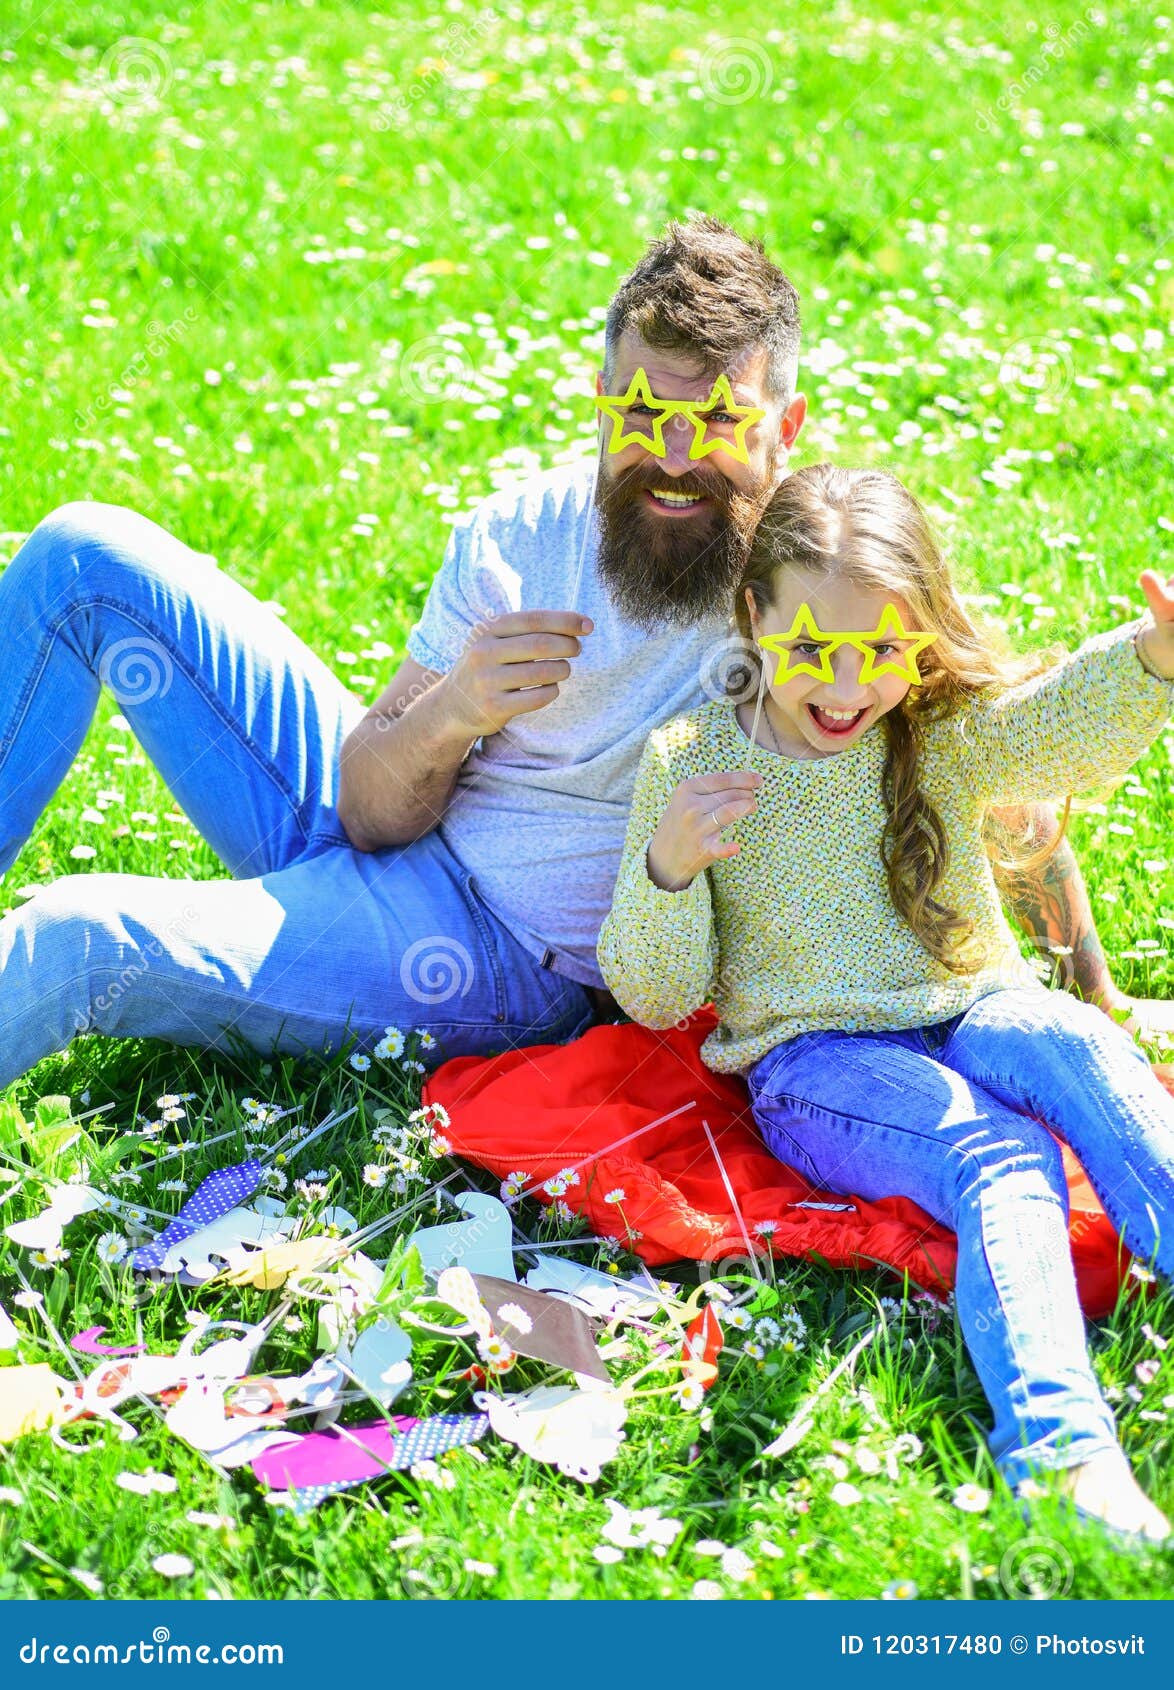 father and daughter sits on grass at grassplot, green background. child and dad posing with star d eyeglases photo